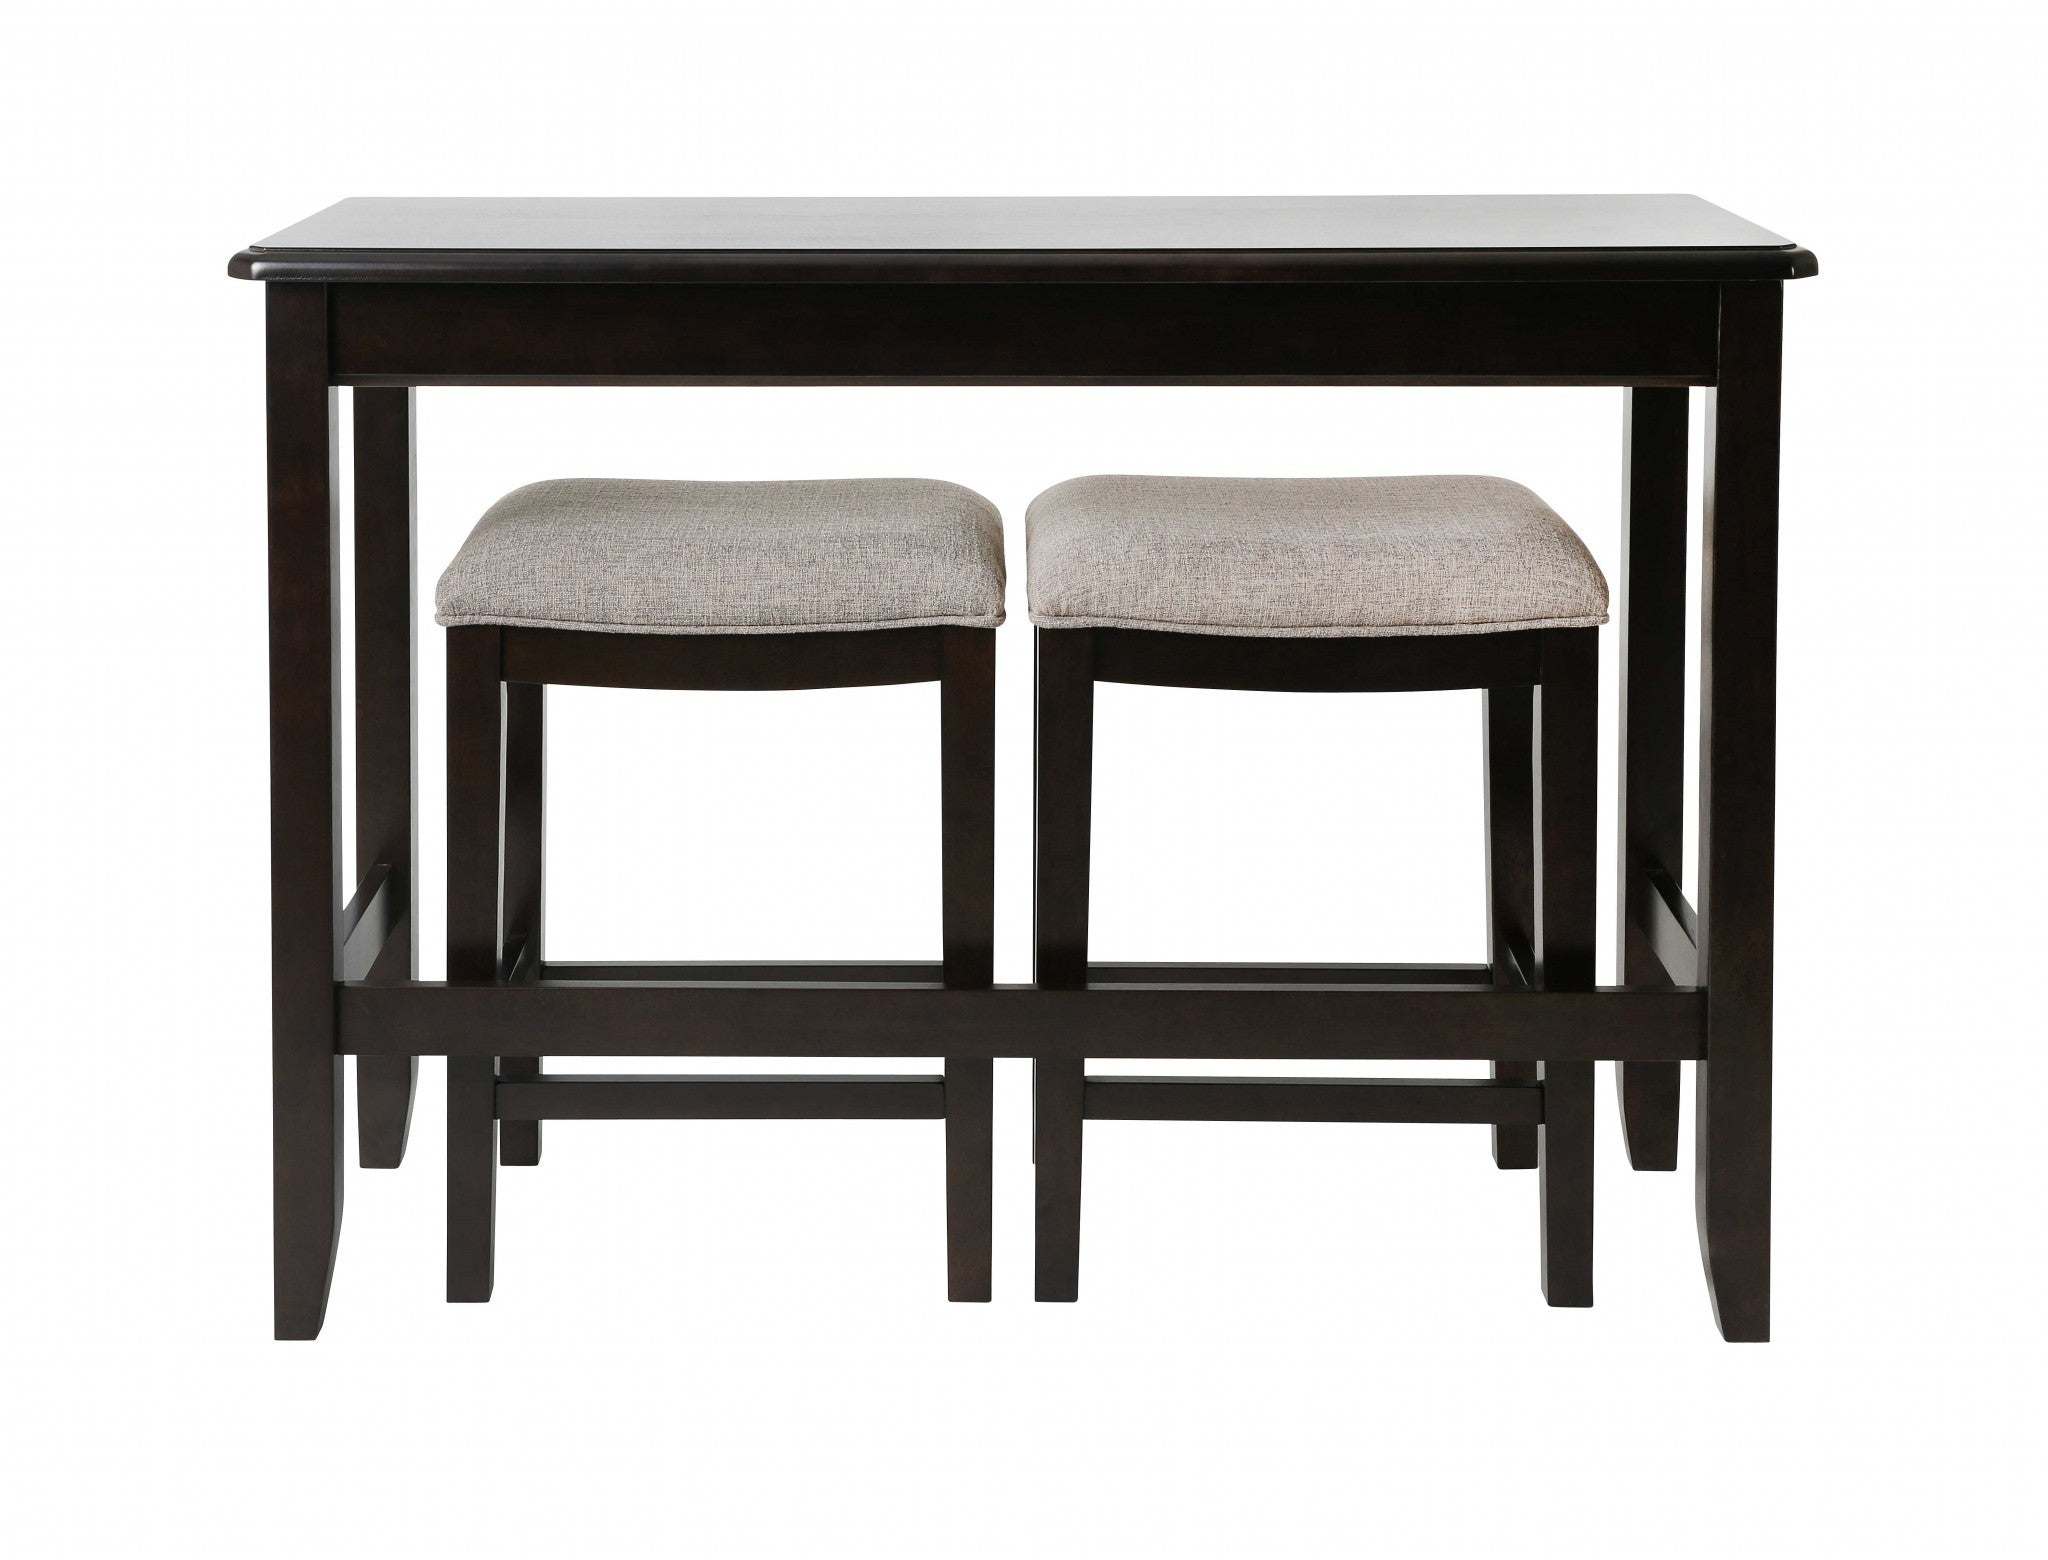 " Light Gray And Dark Brown Solid Wood Backless Bar Chair